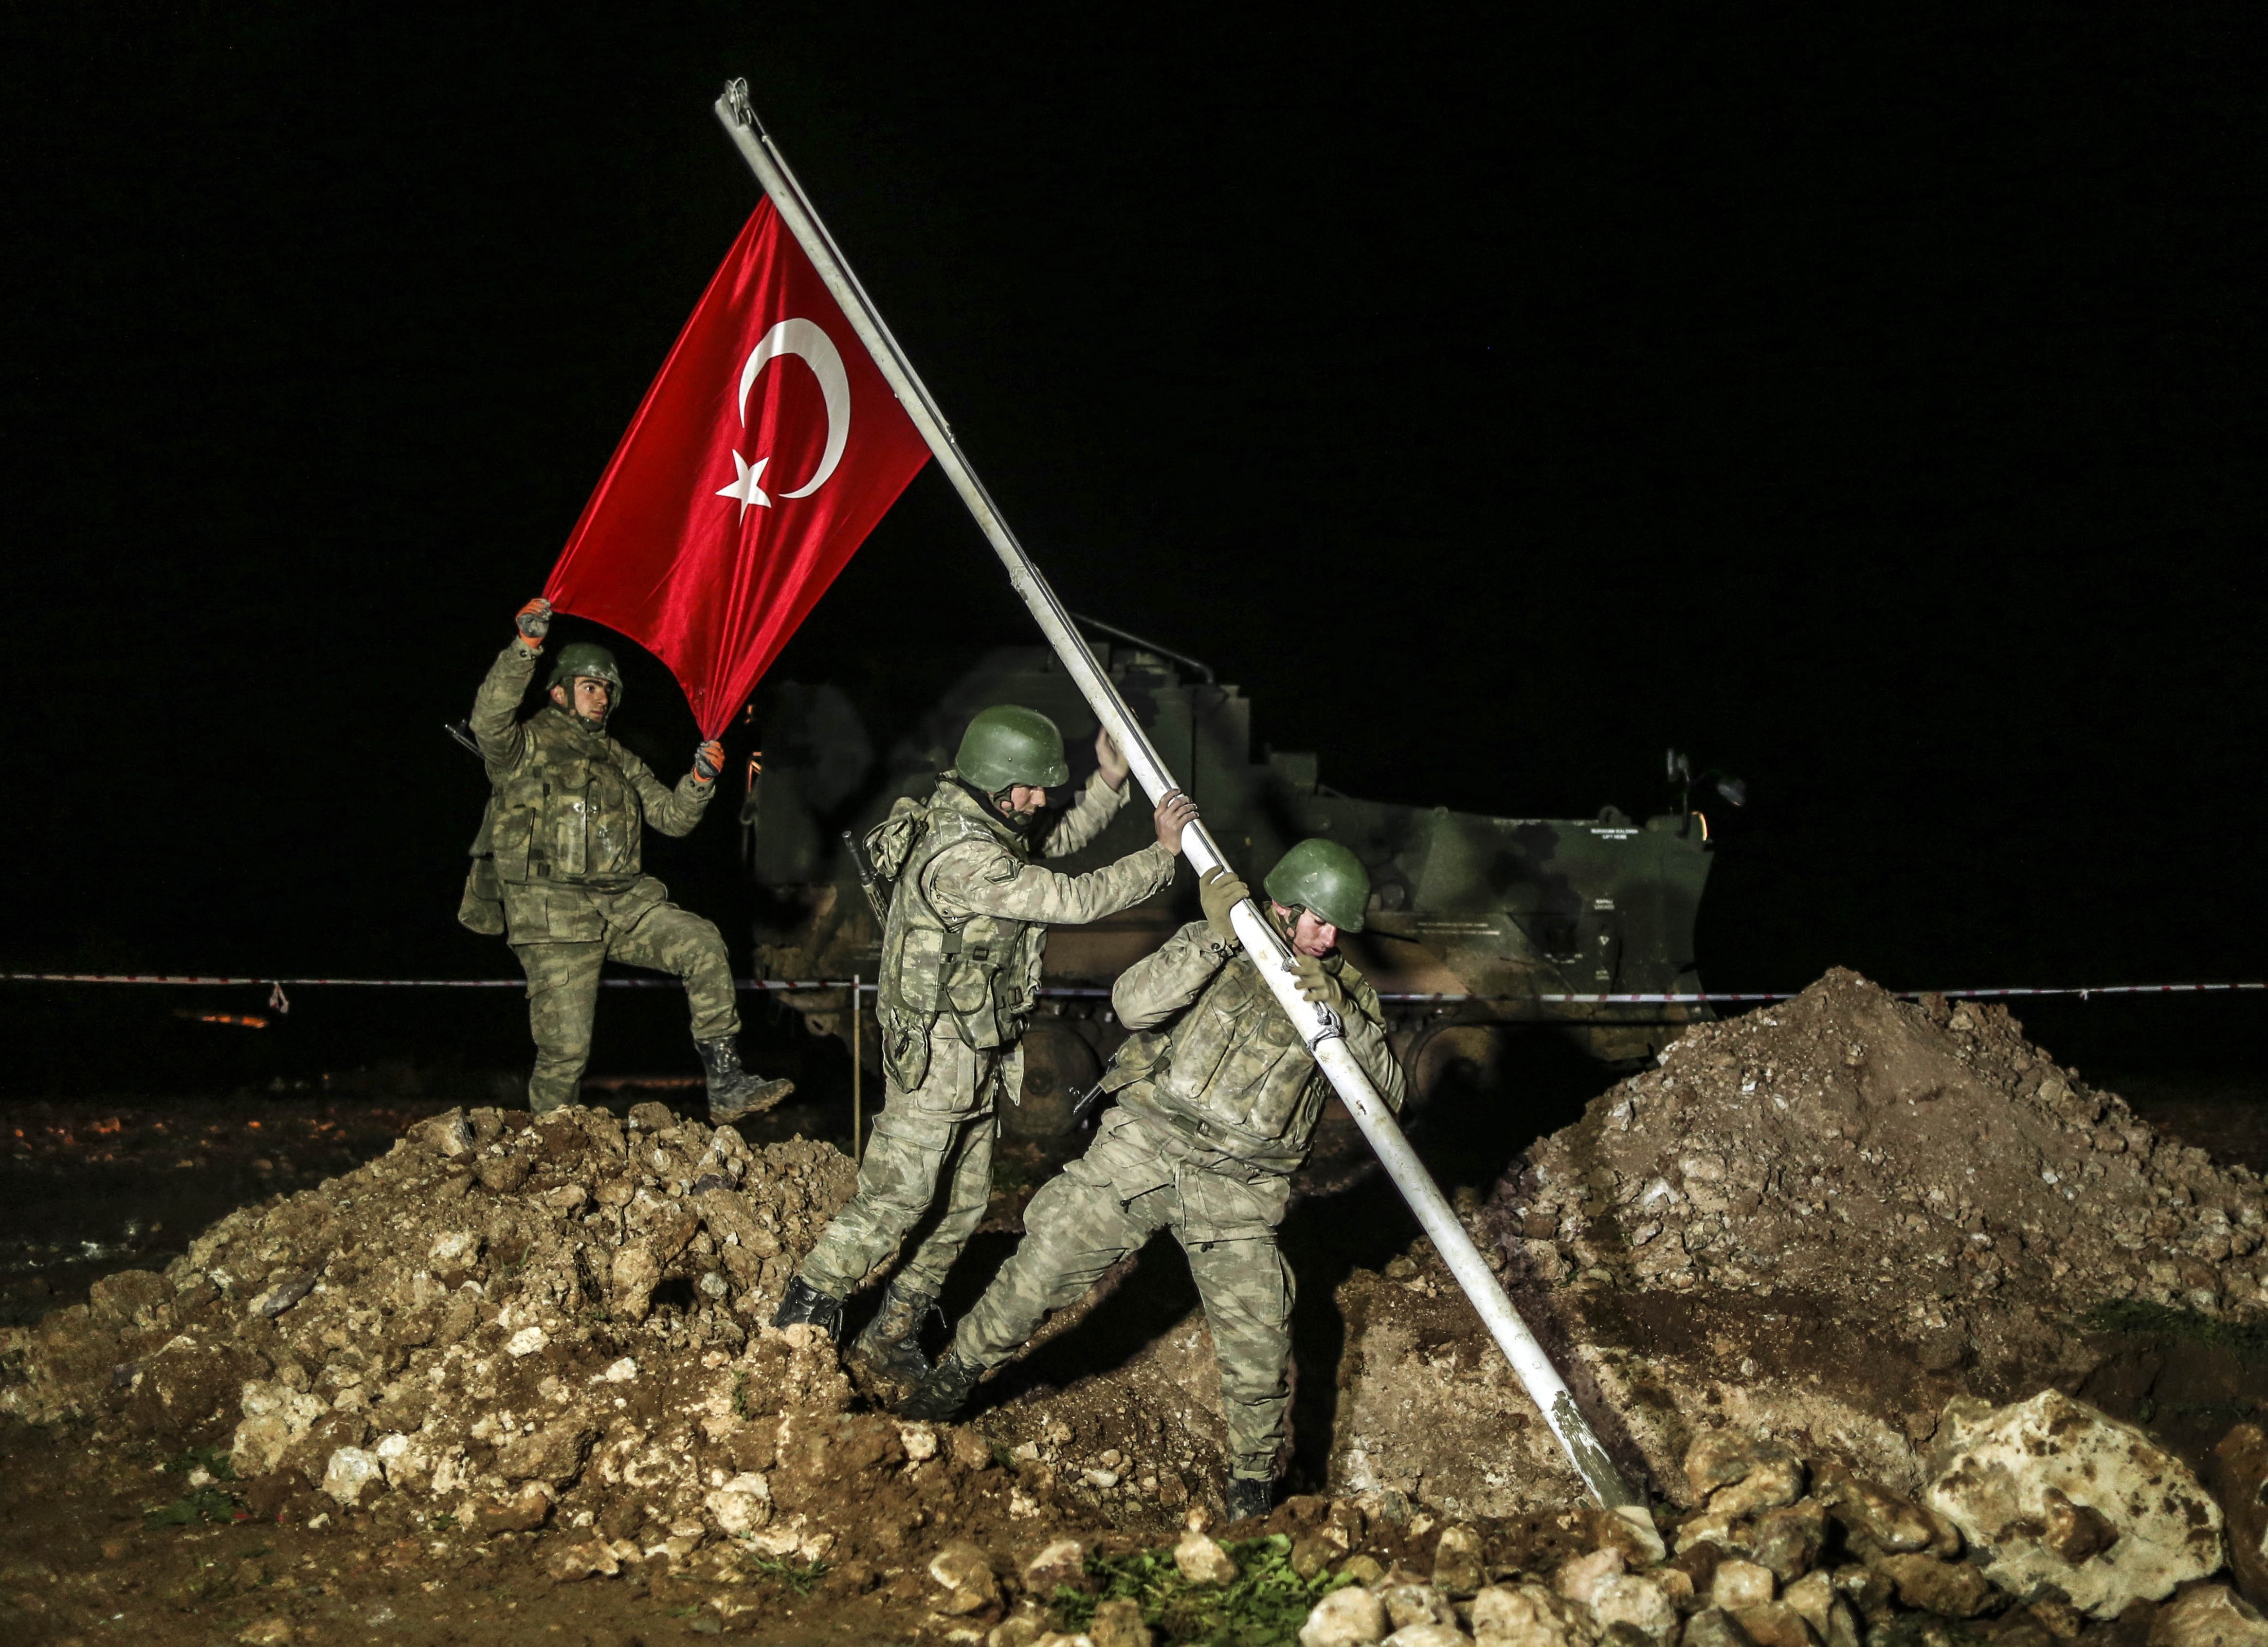 Turkish soldiers put a wire fence around area after Turkish flag is raised on Feb. 22, 2015 in the Esme region of Aleppo where the Tomb of Suleyman Shah will be placed. (Firat Yurdakul—Anadolu Agency/Getty Images)